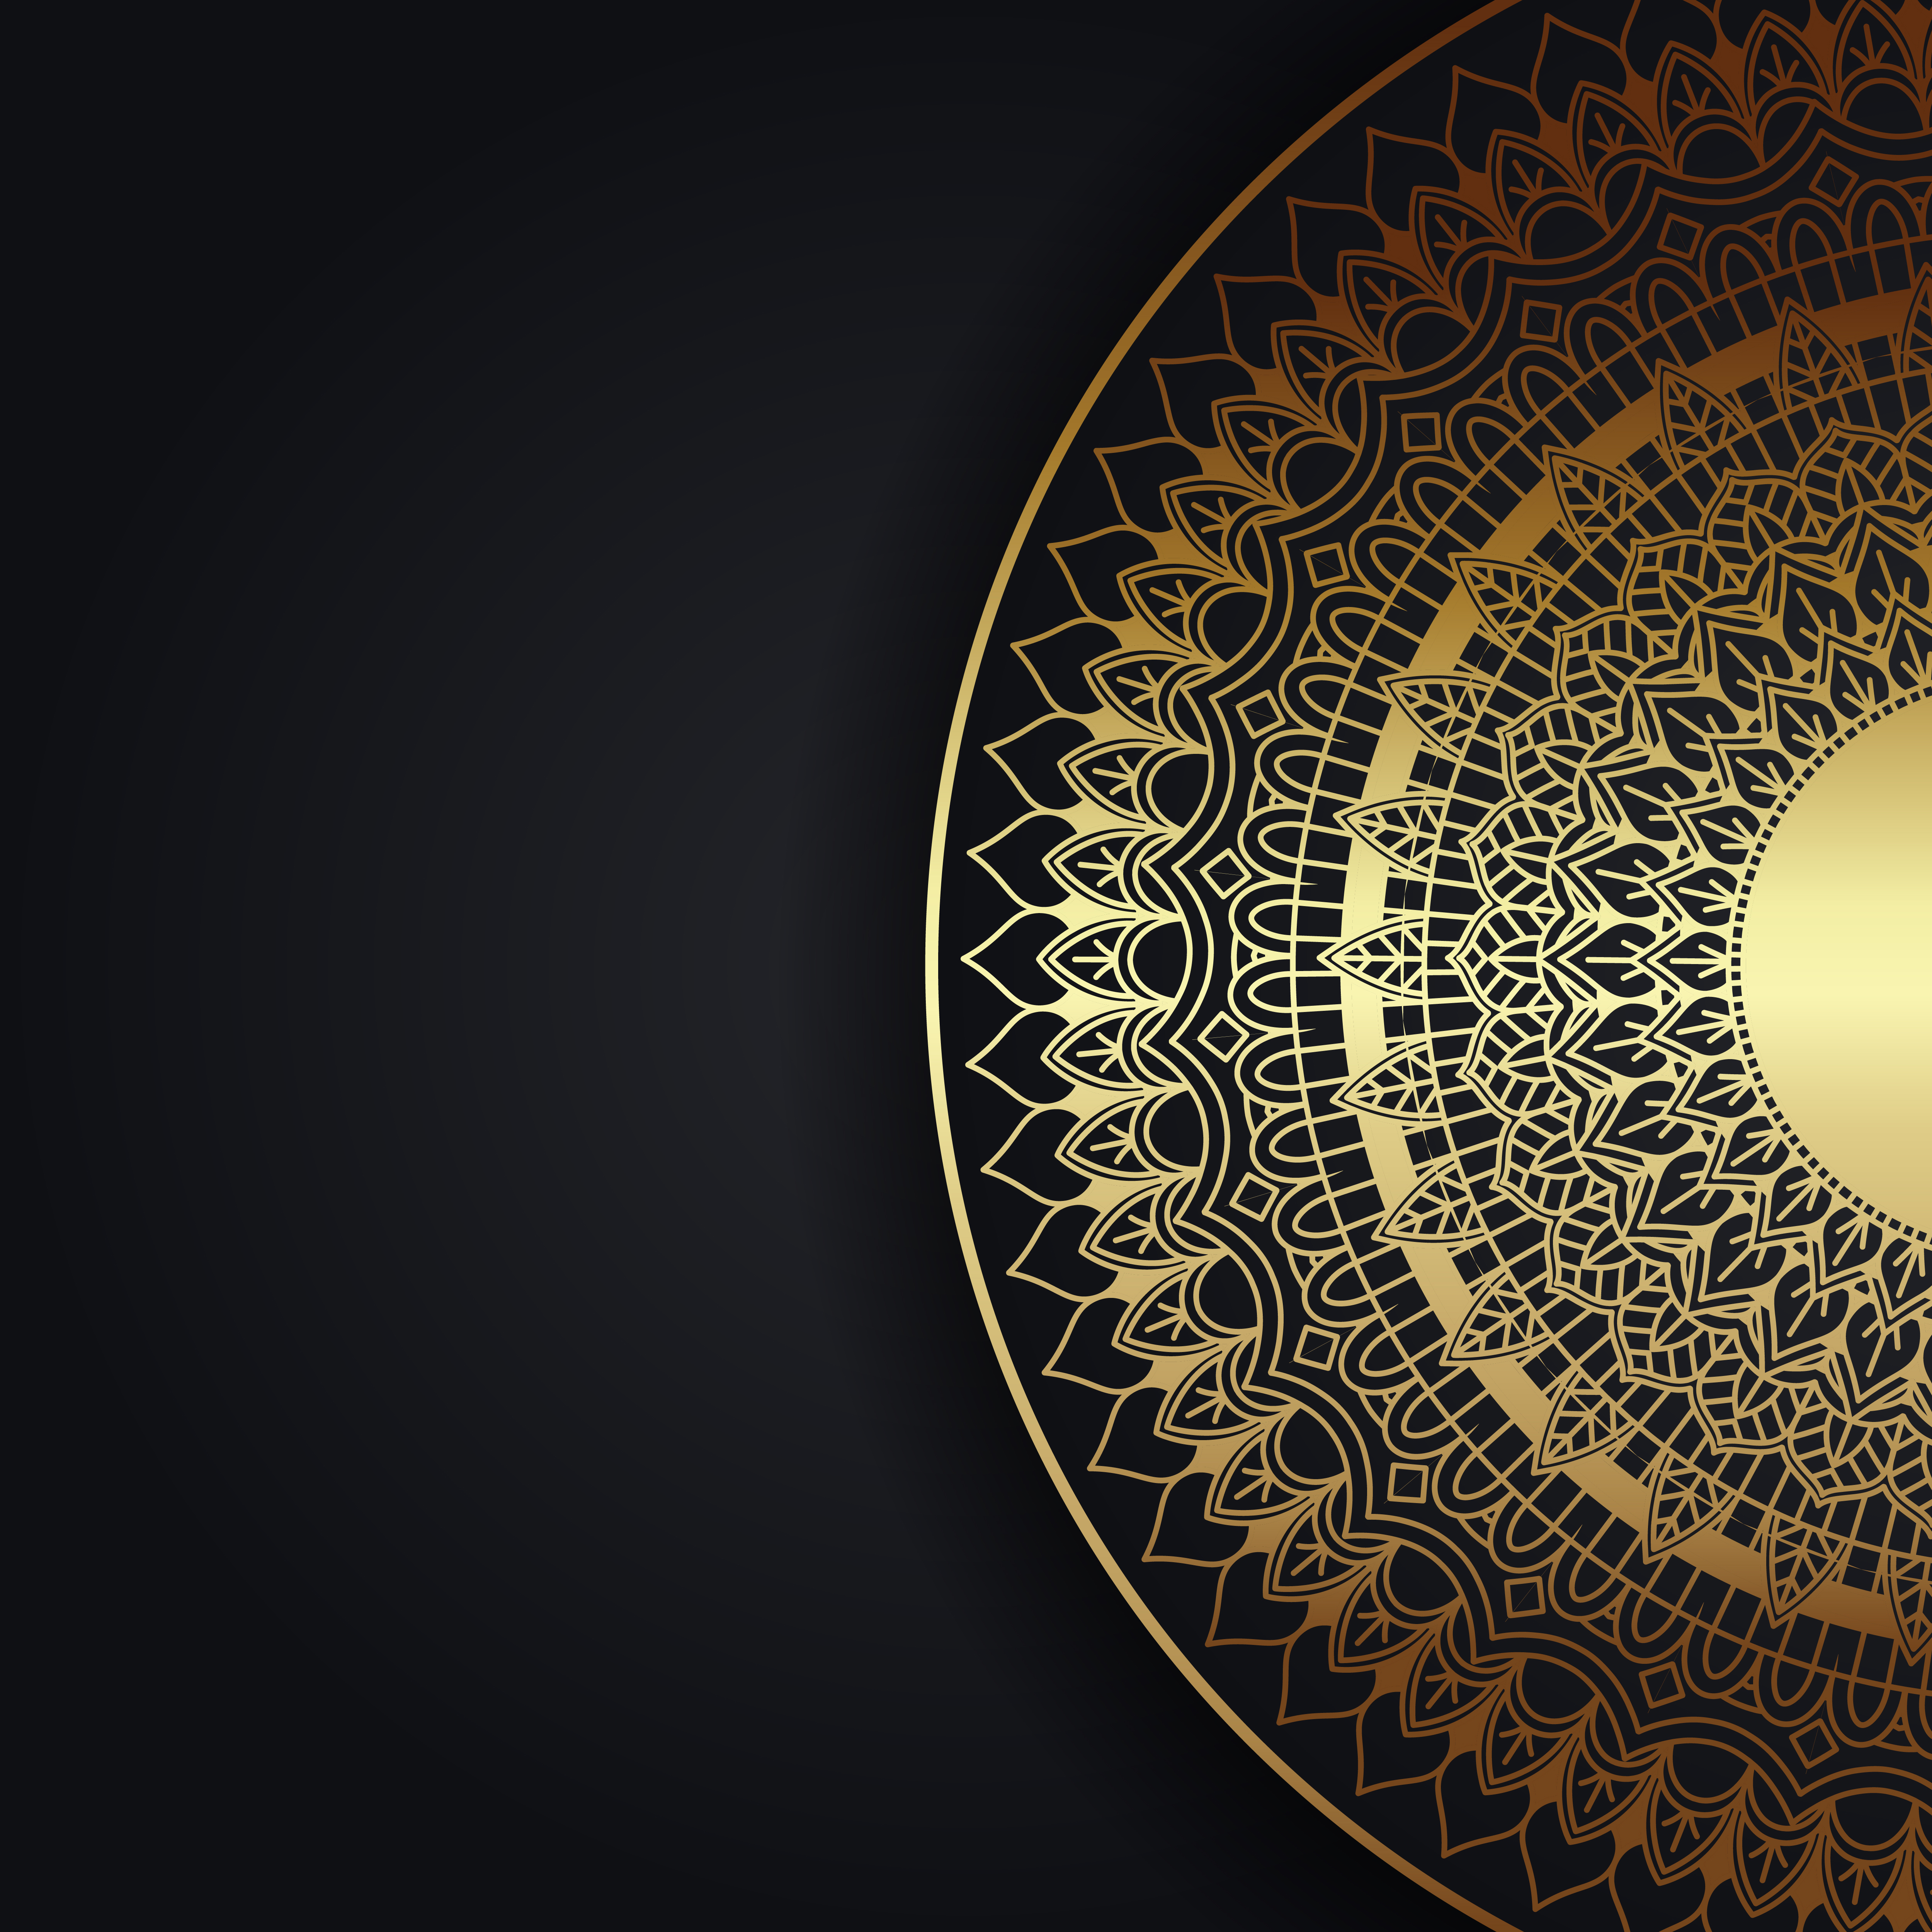 Decorative Background with Gold Mandala 834636 - Download Free Vectors